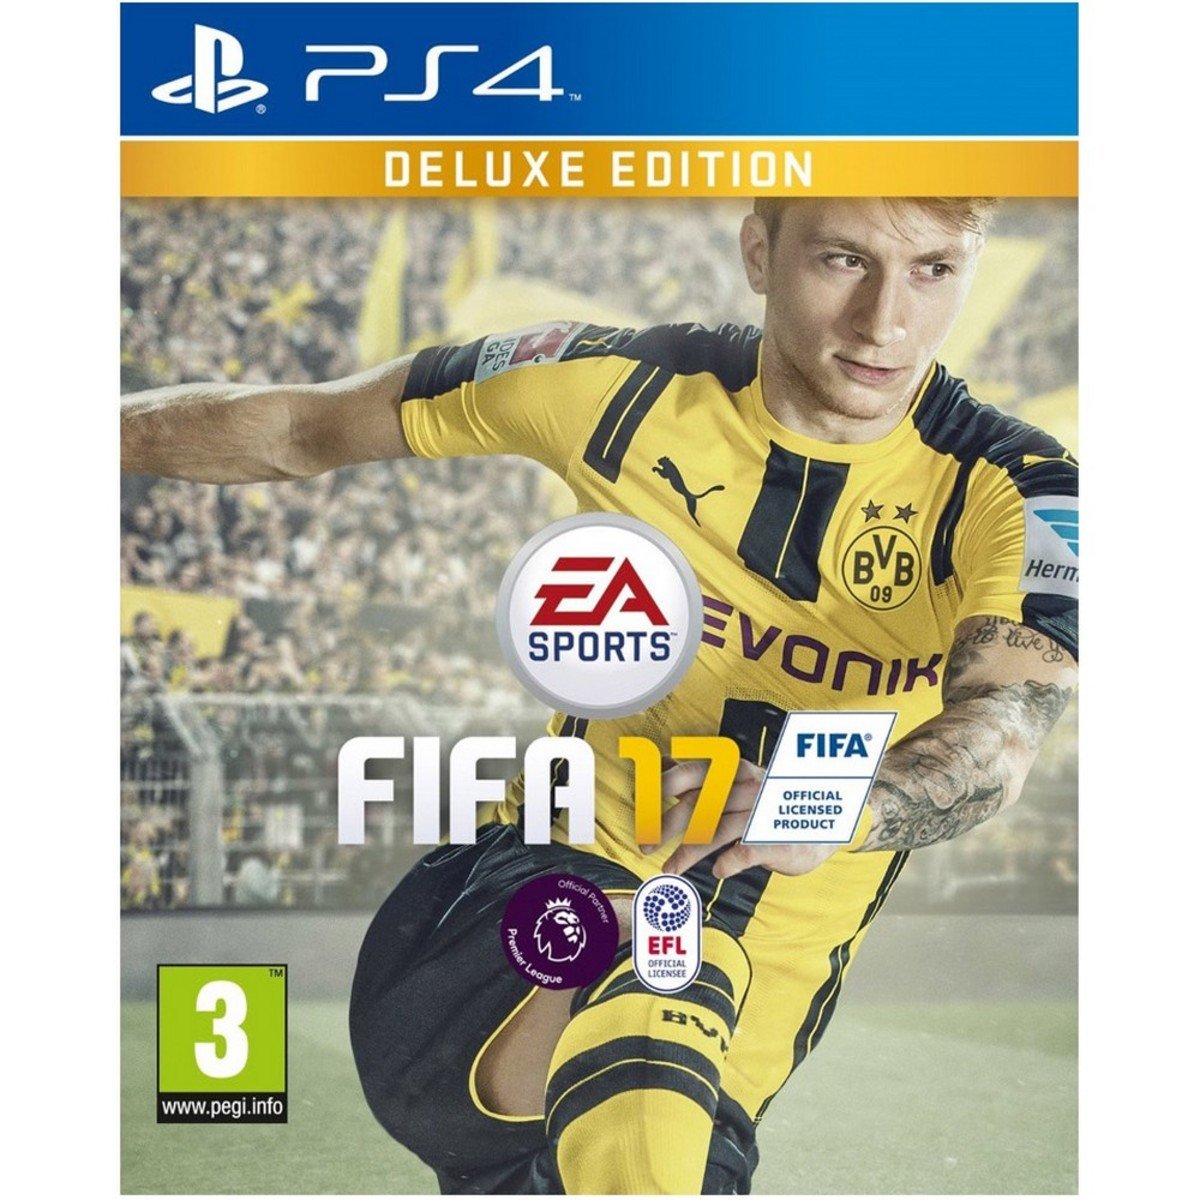 PS4 FIFA 17 Deluxe